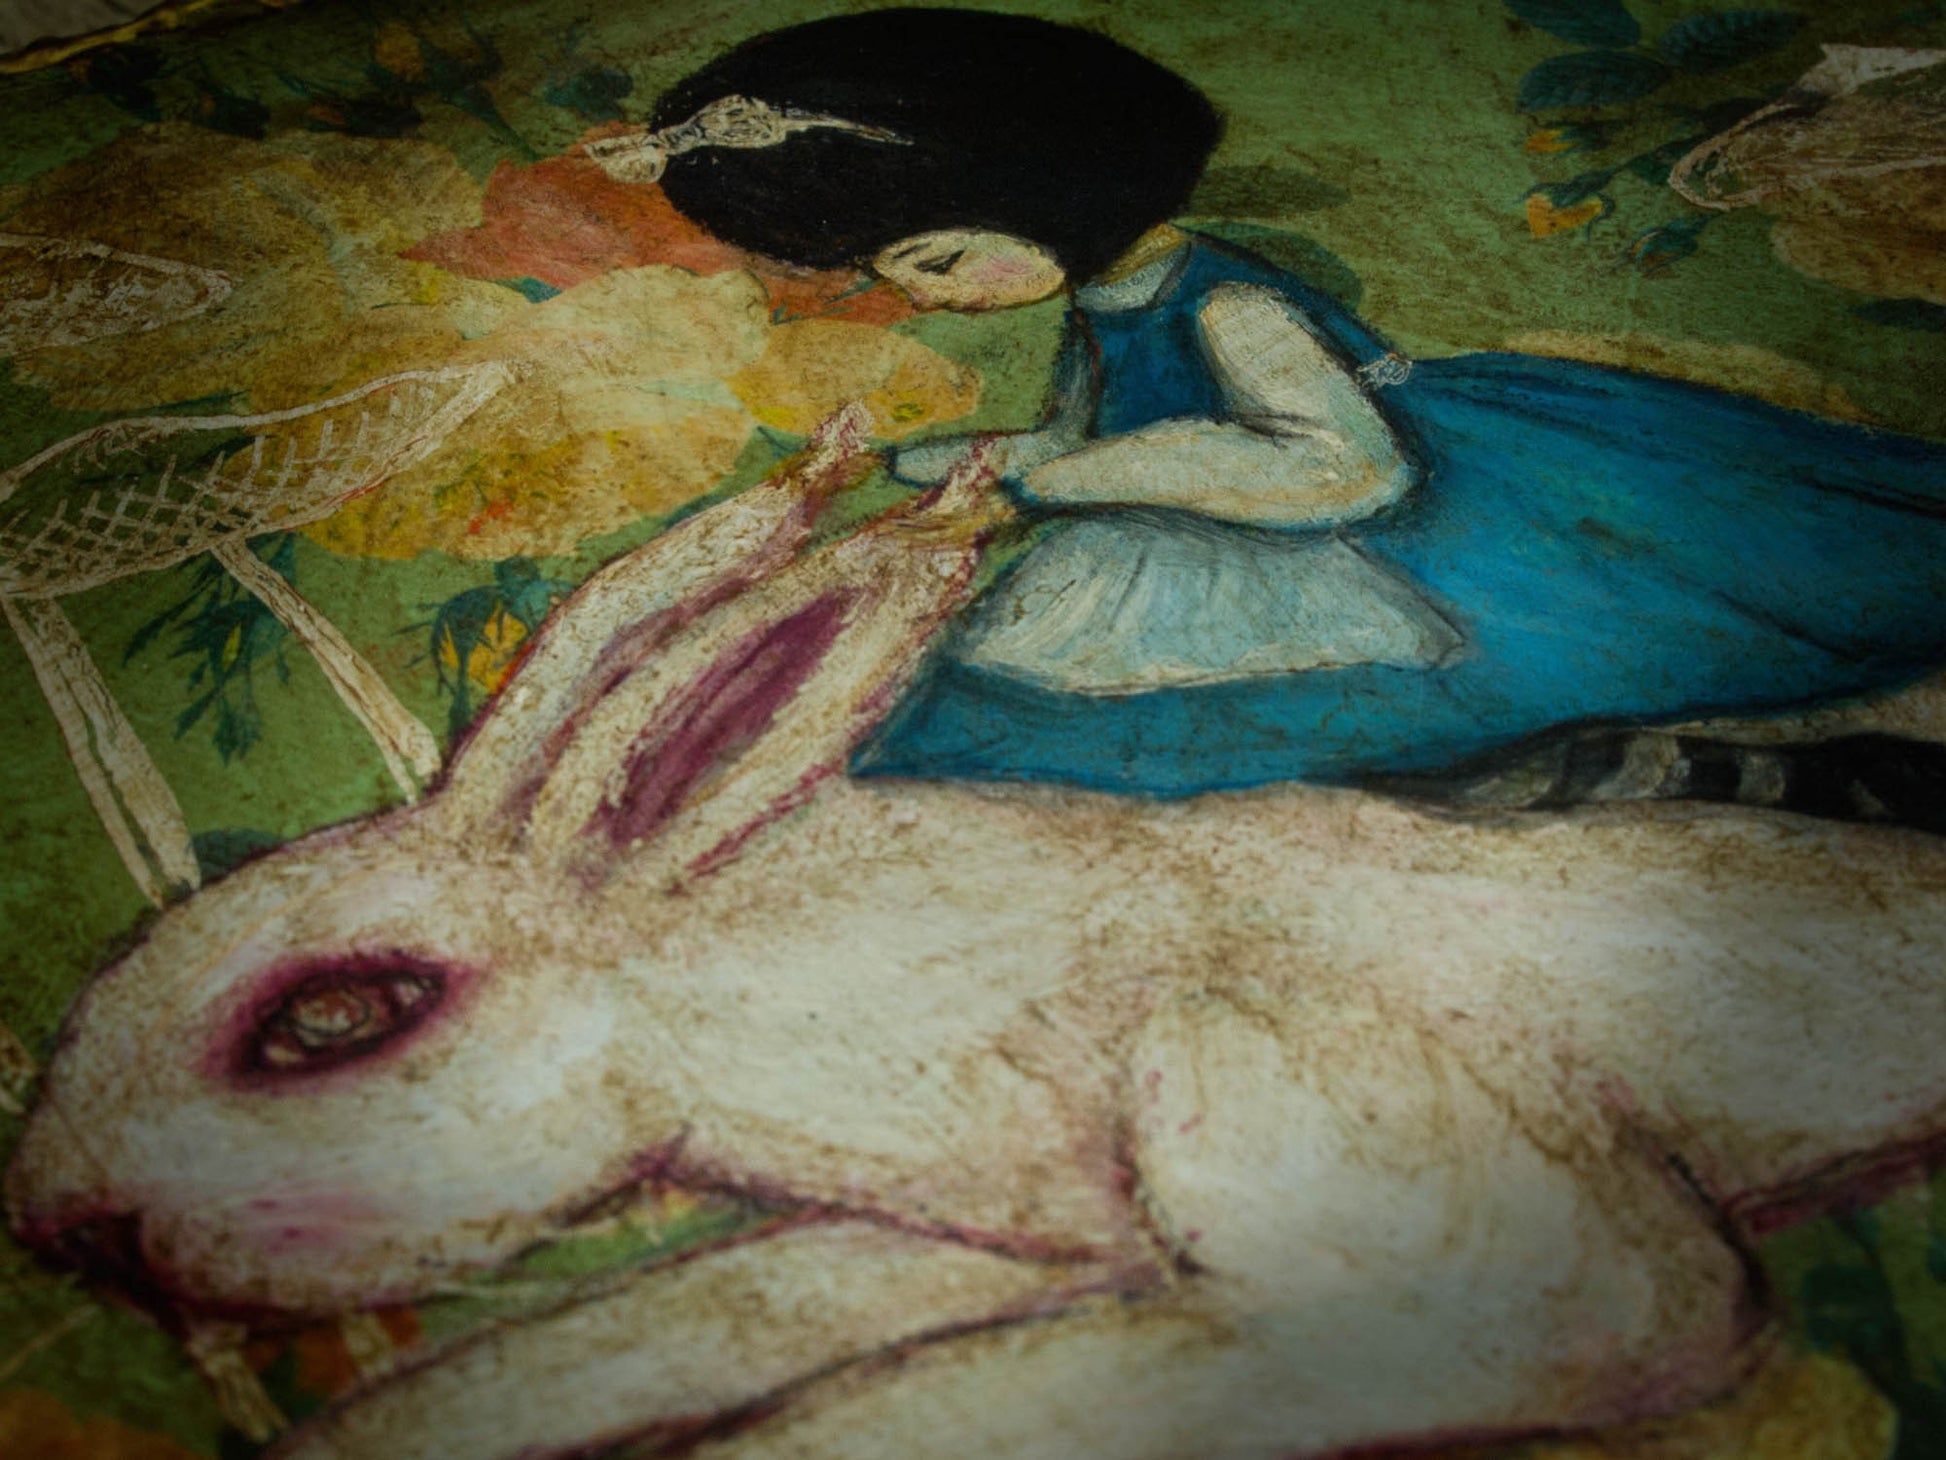 Alice finally caught up with the white rabbit on this surreal painting by Danita, and now they ride together in Wonderland, looking for new adventures for which they will never be late.